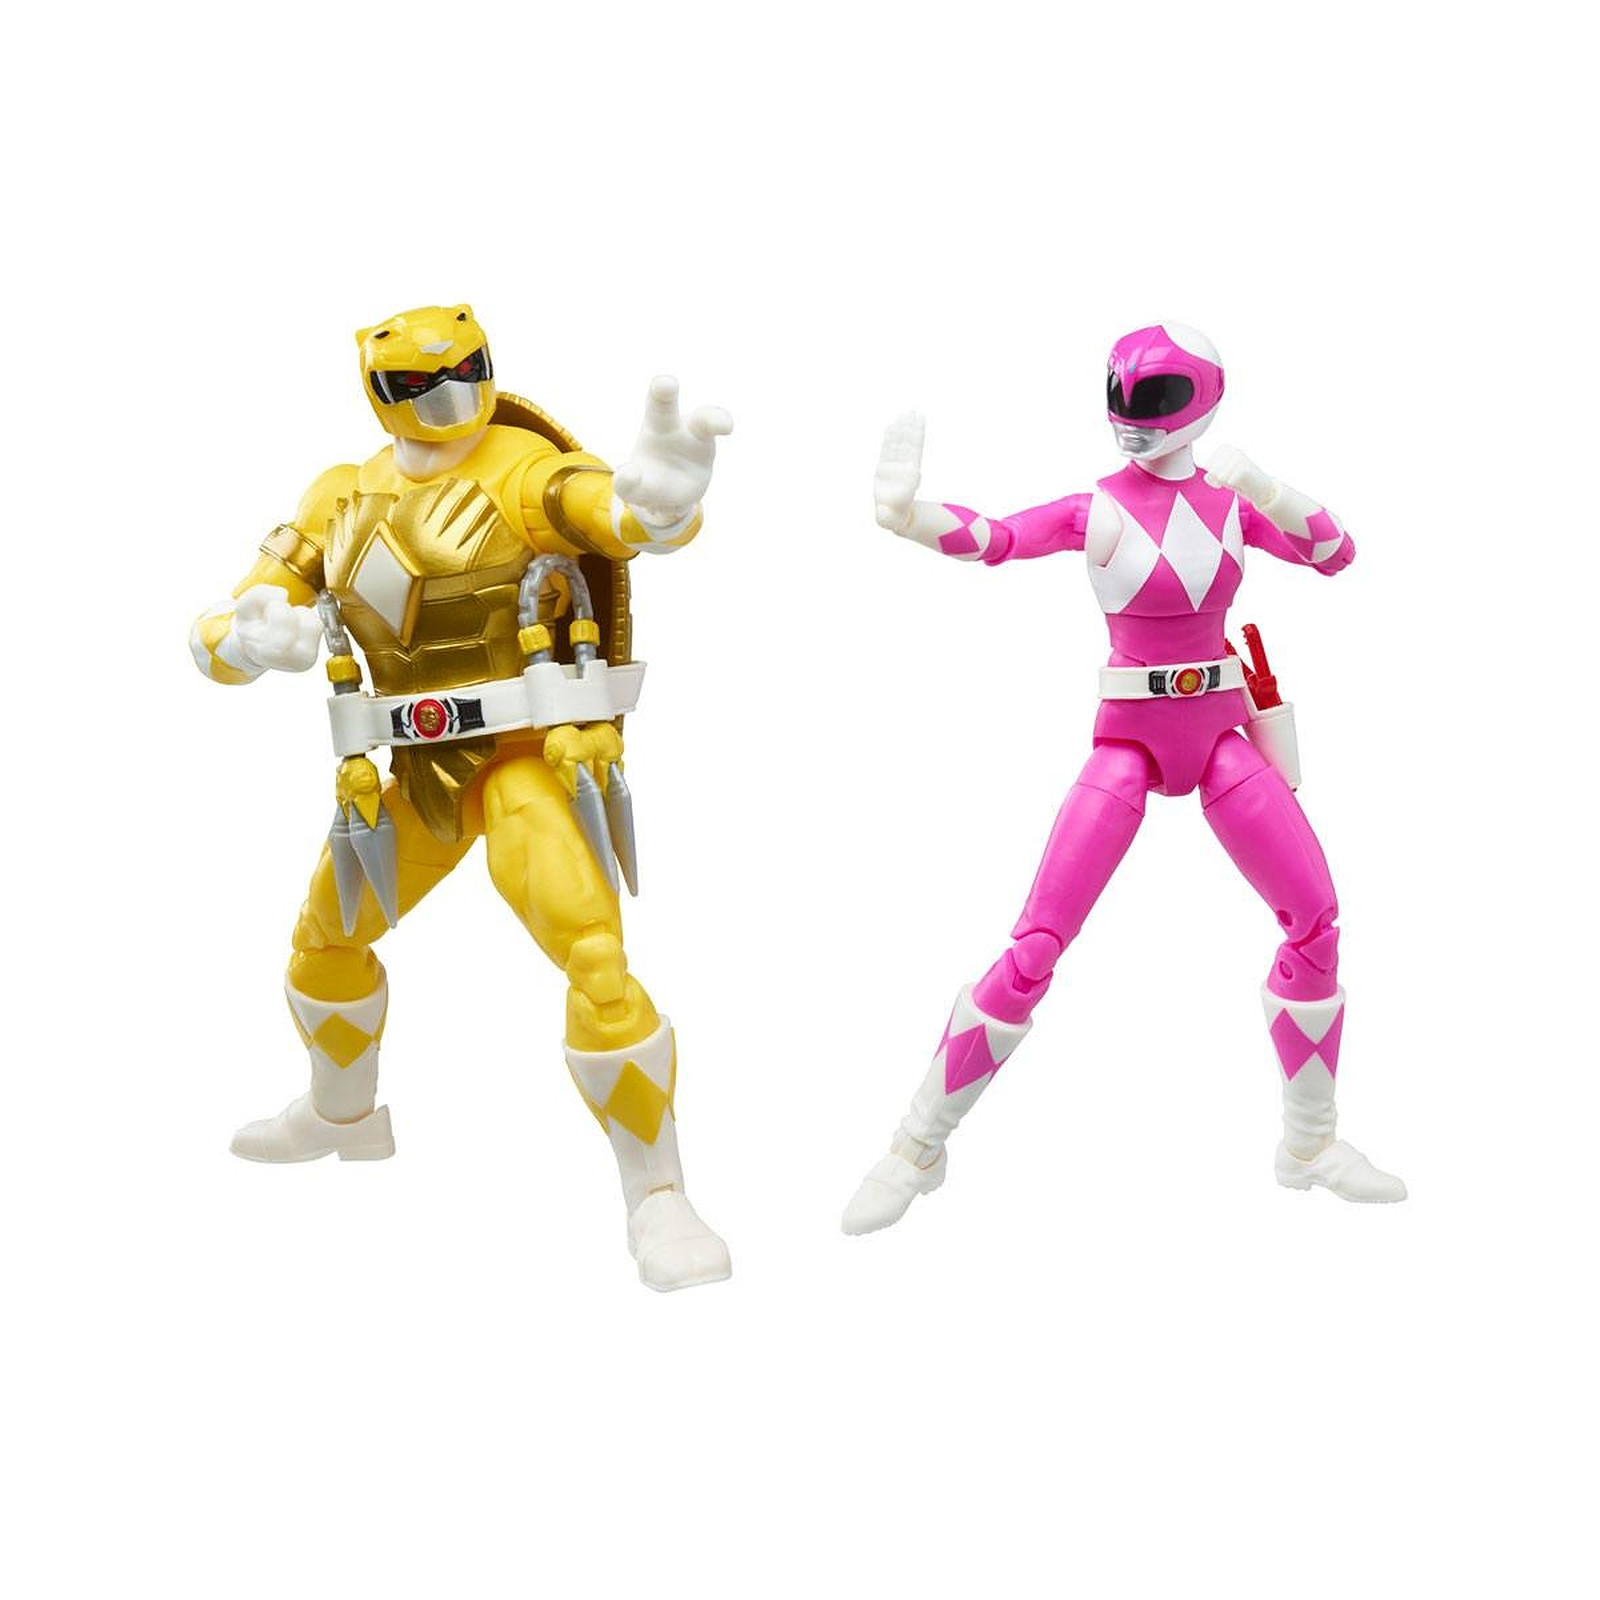 Power Rangers X TMNT Lightning Collection 2022 - Figurines Morphed April O'Neil & Michelangelo - Figurines Hasbro